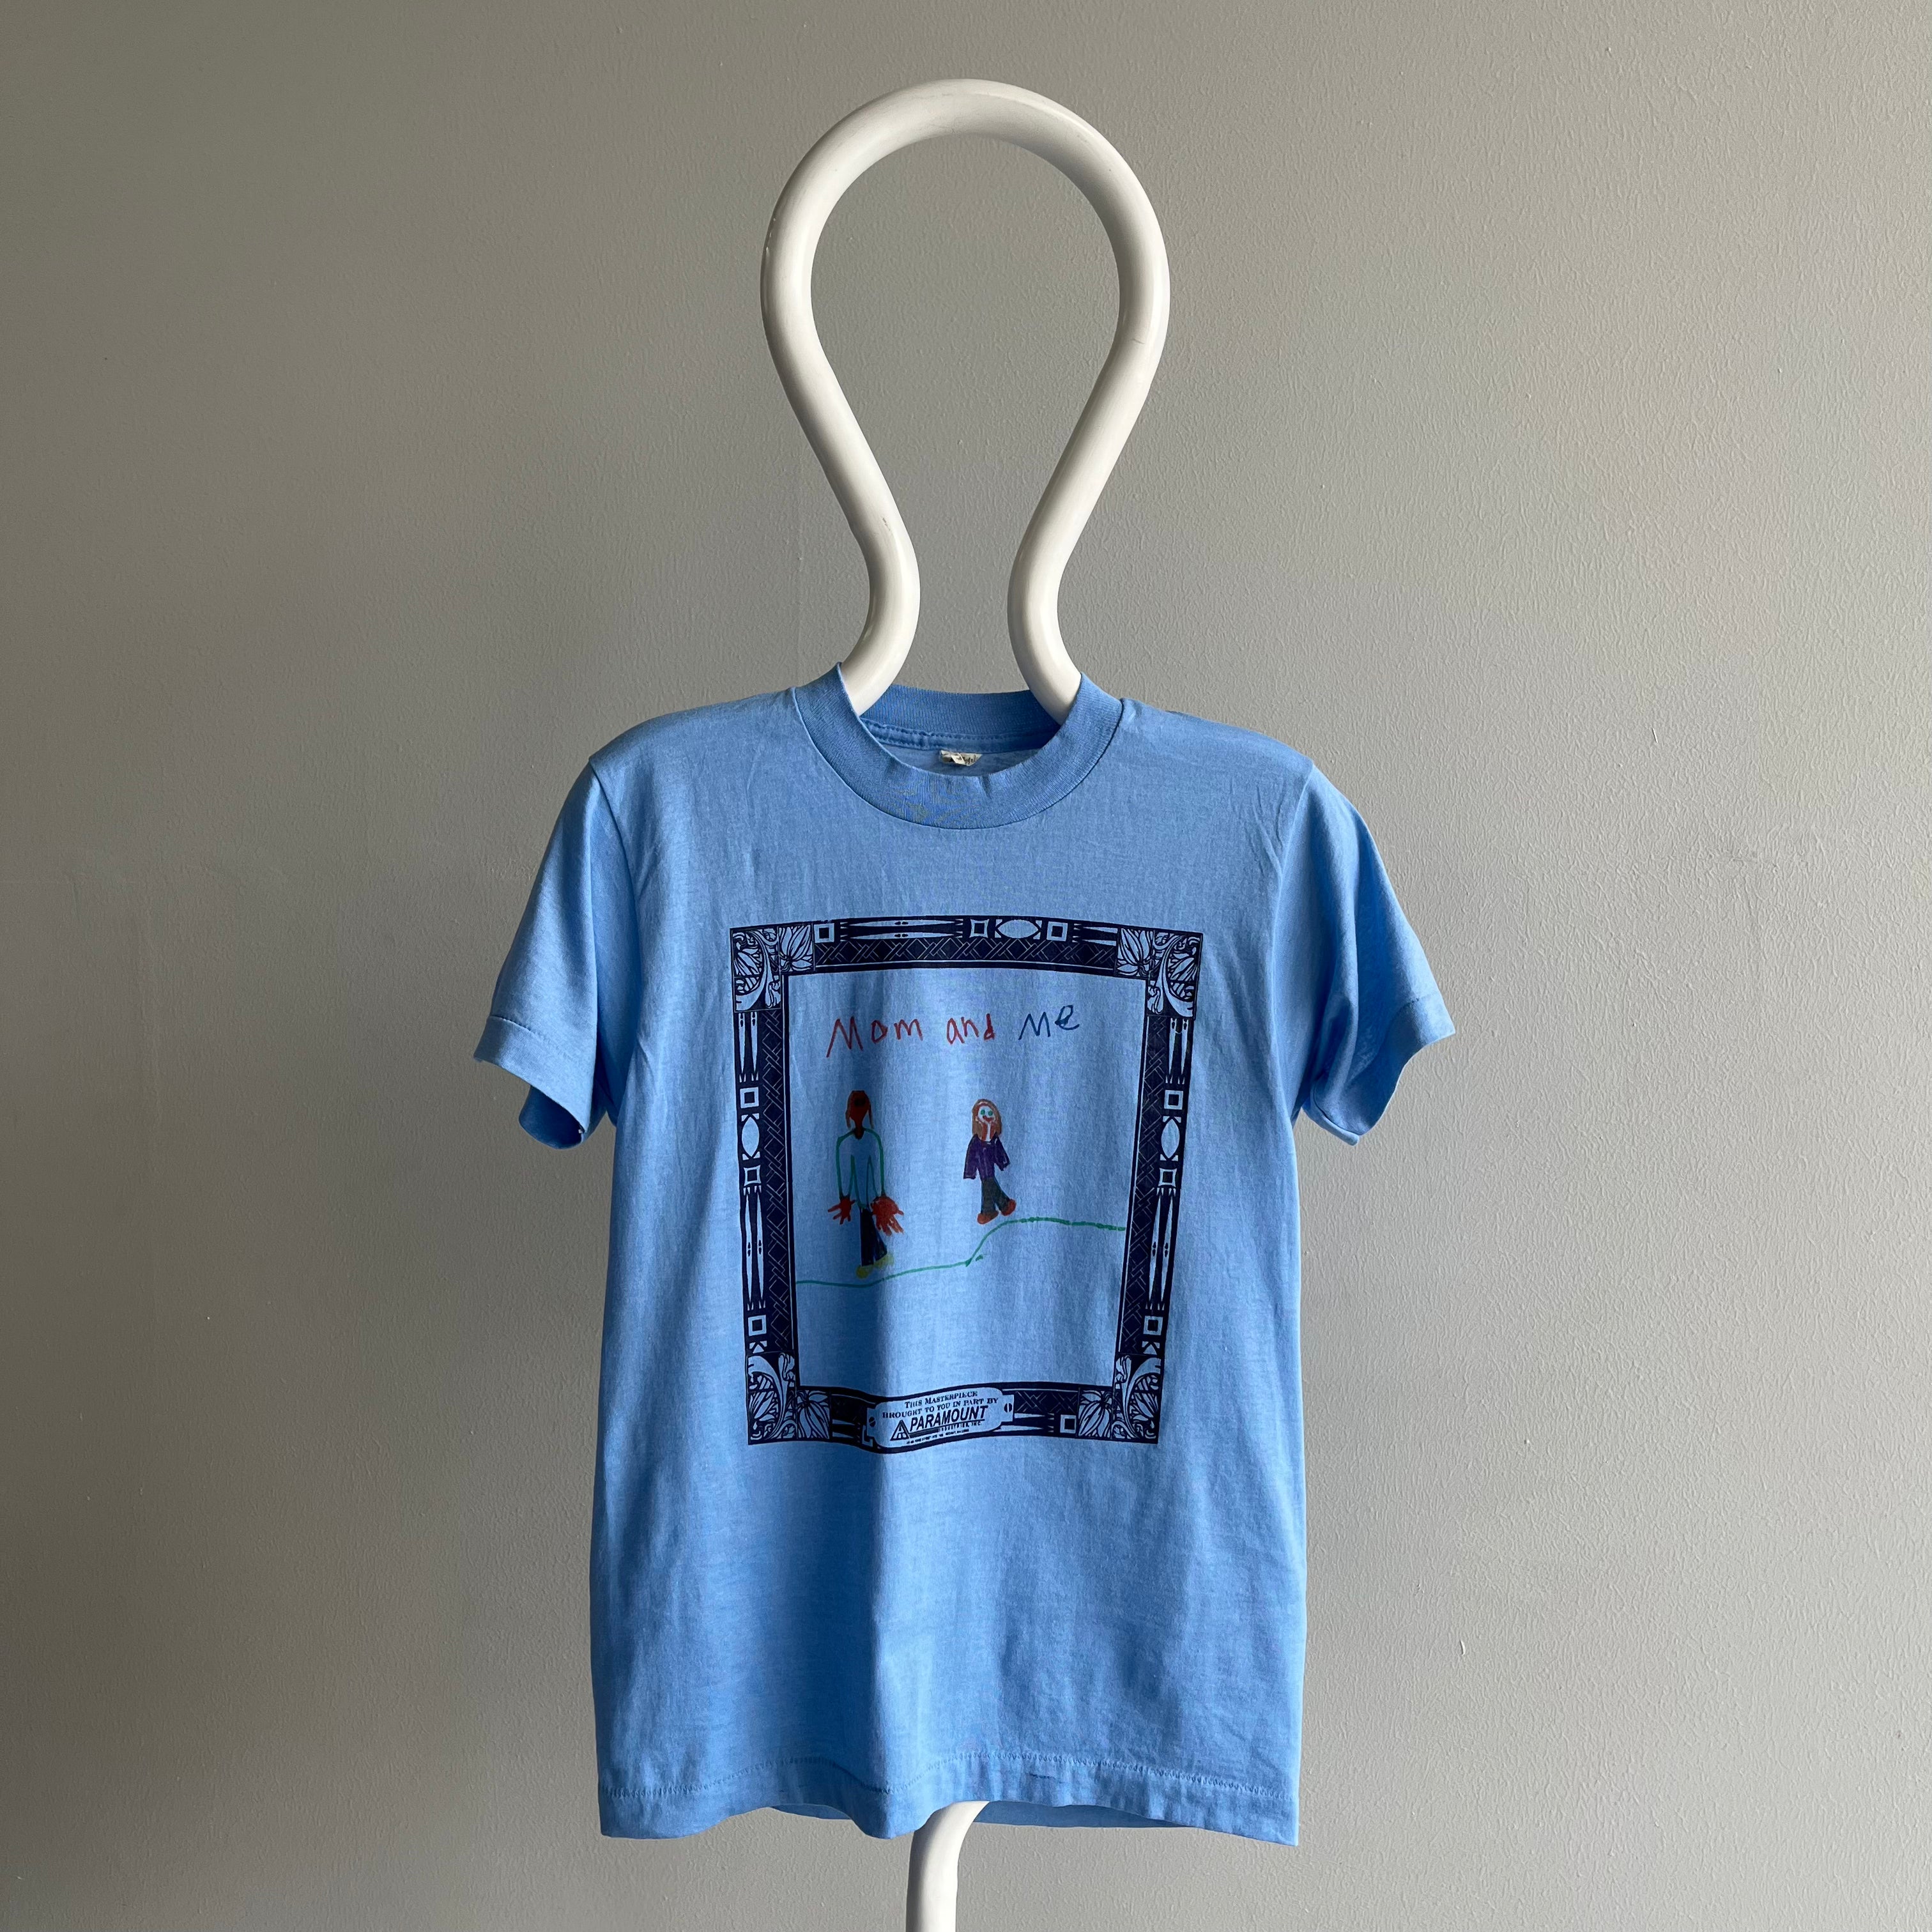 1980s Mom and Me Masterpiece T-Shirt